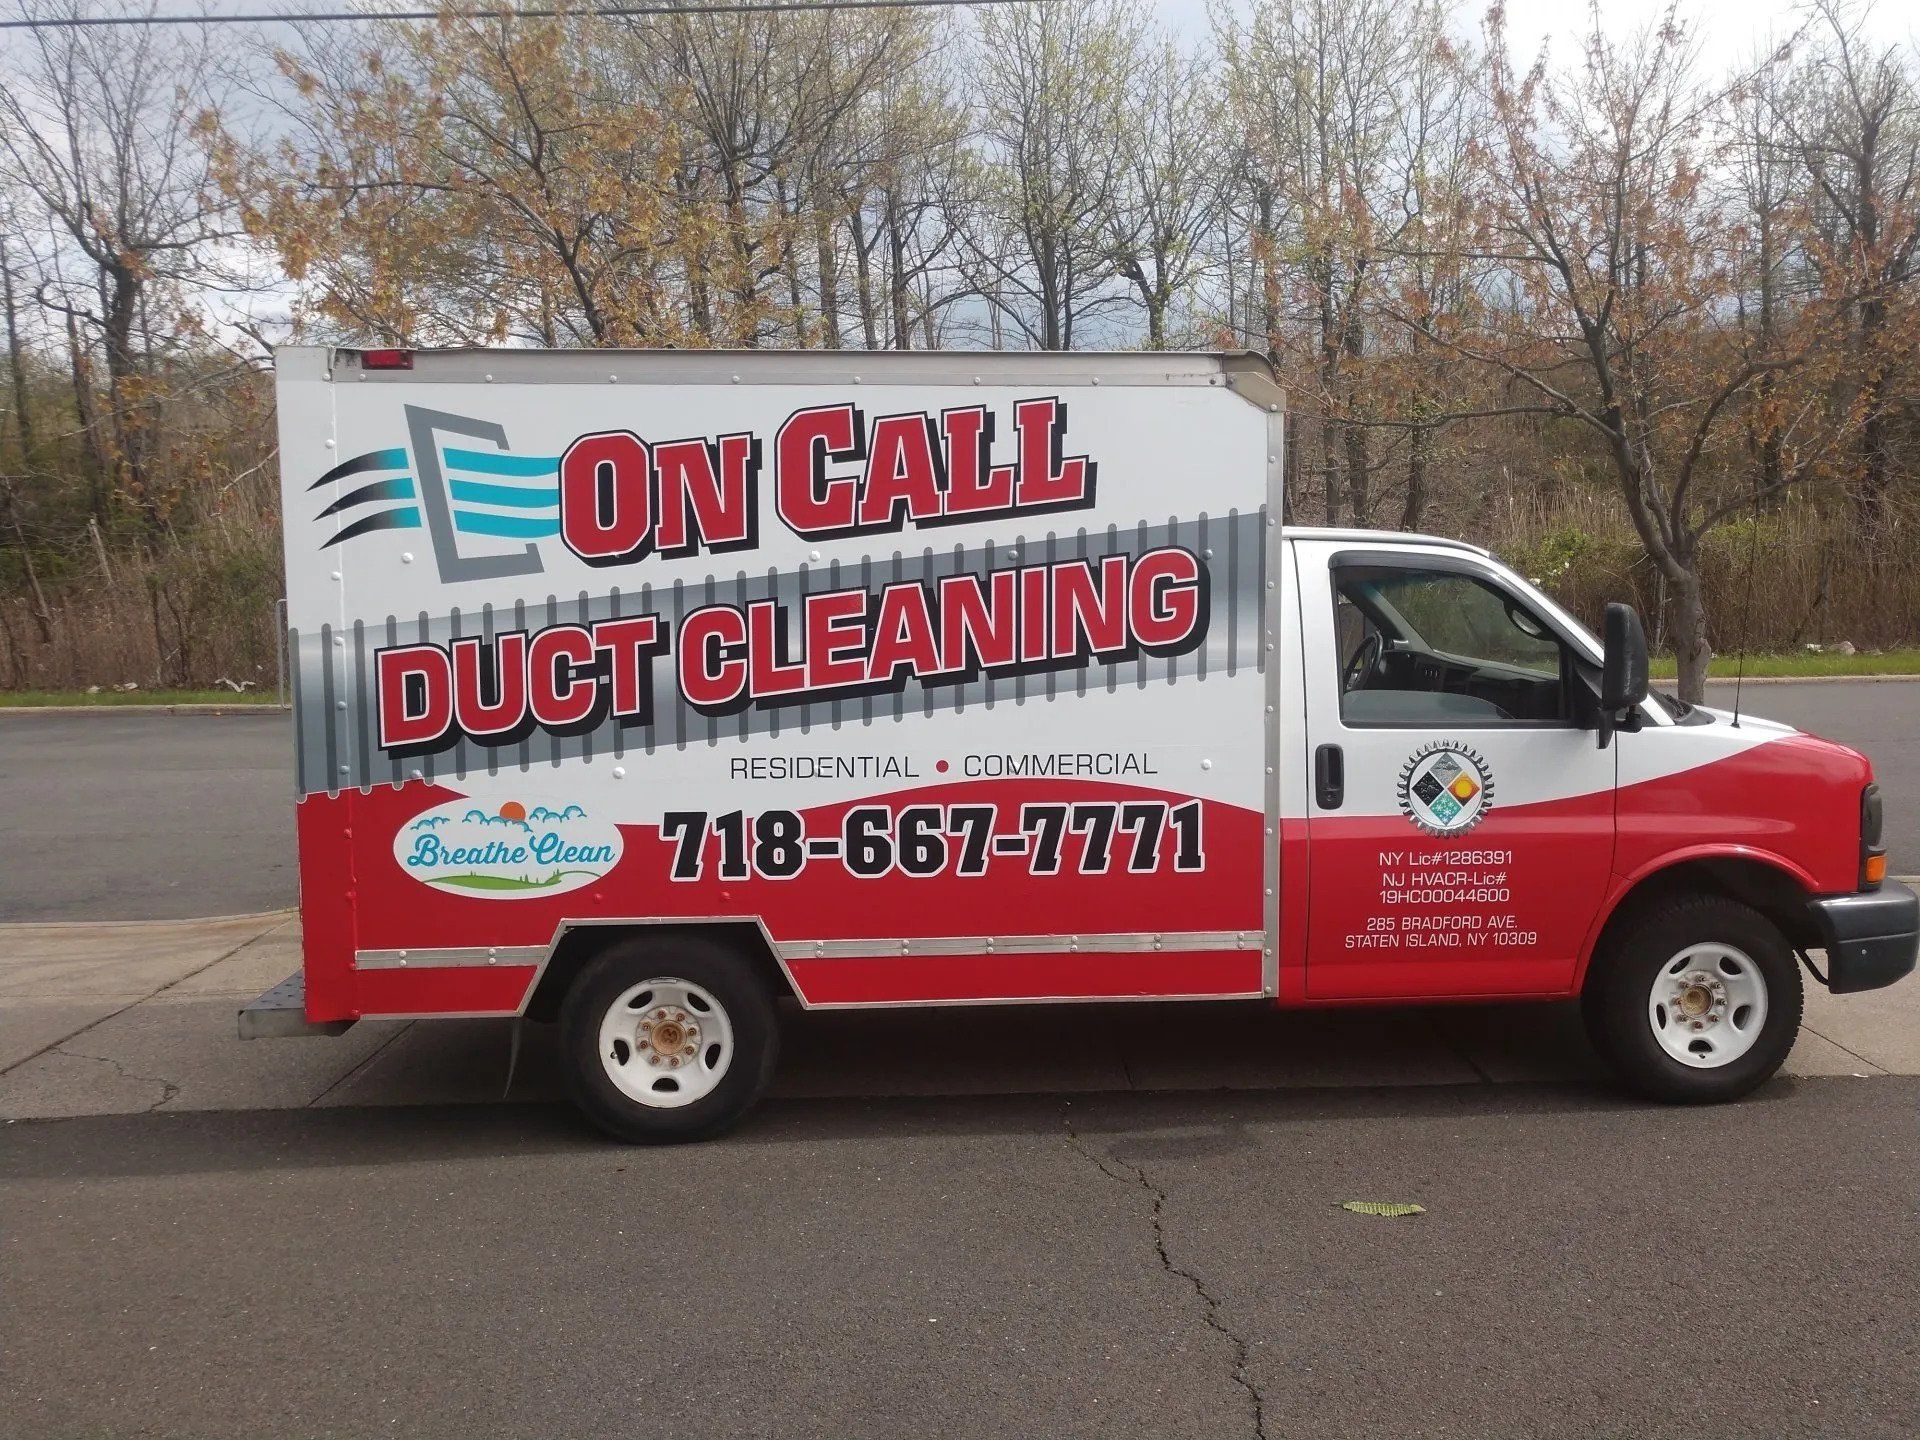 Duct Cleaning Service — Staten Island, NY — On Call Mechanical Services, Inc.